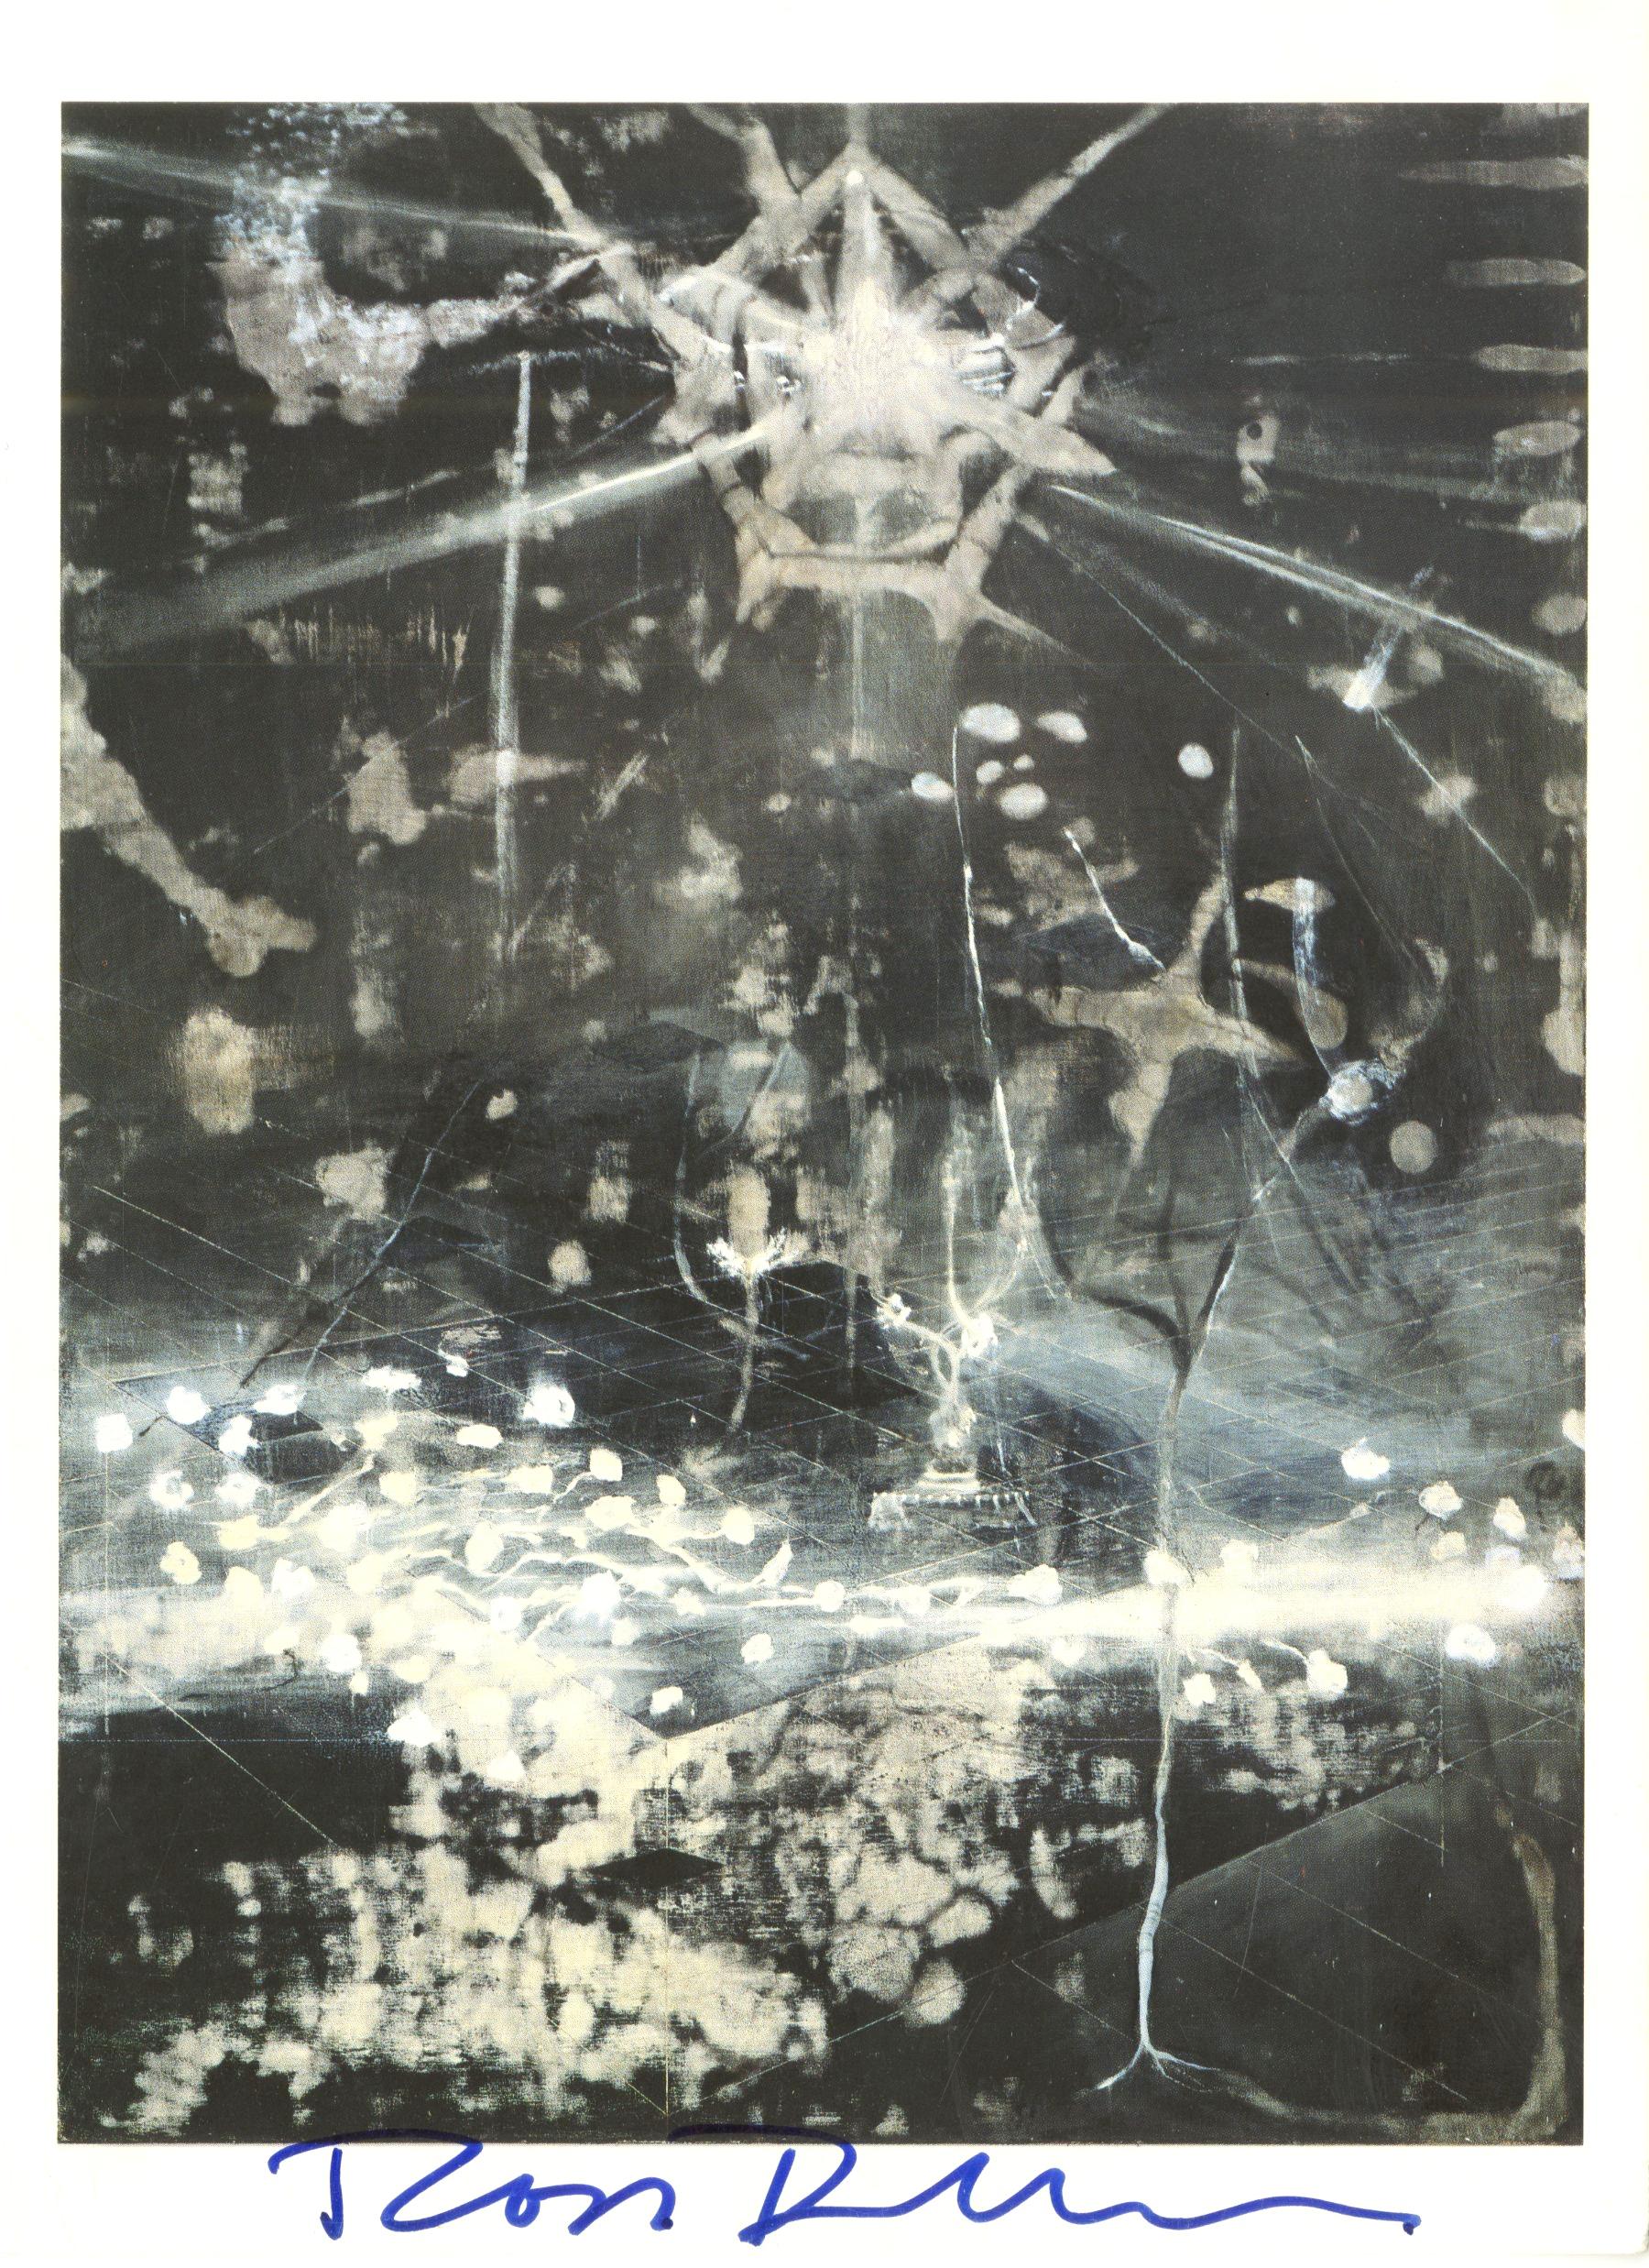 The Seventh Examined Life: Offset Lithograph Invitation pour Mary Boone Gallery